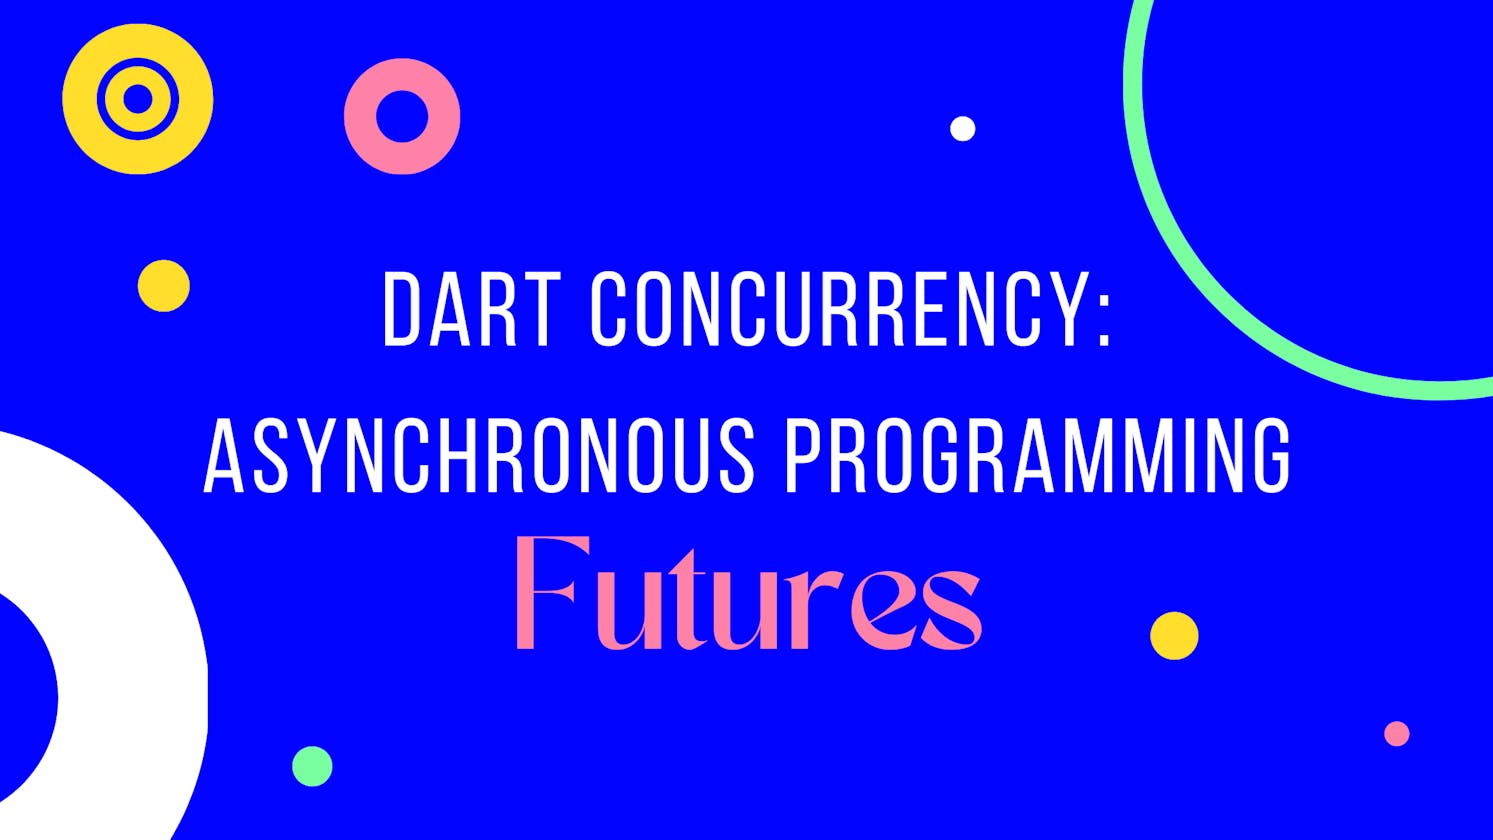 Dart Concurrency: Asynchronous programming